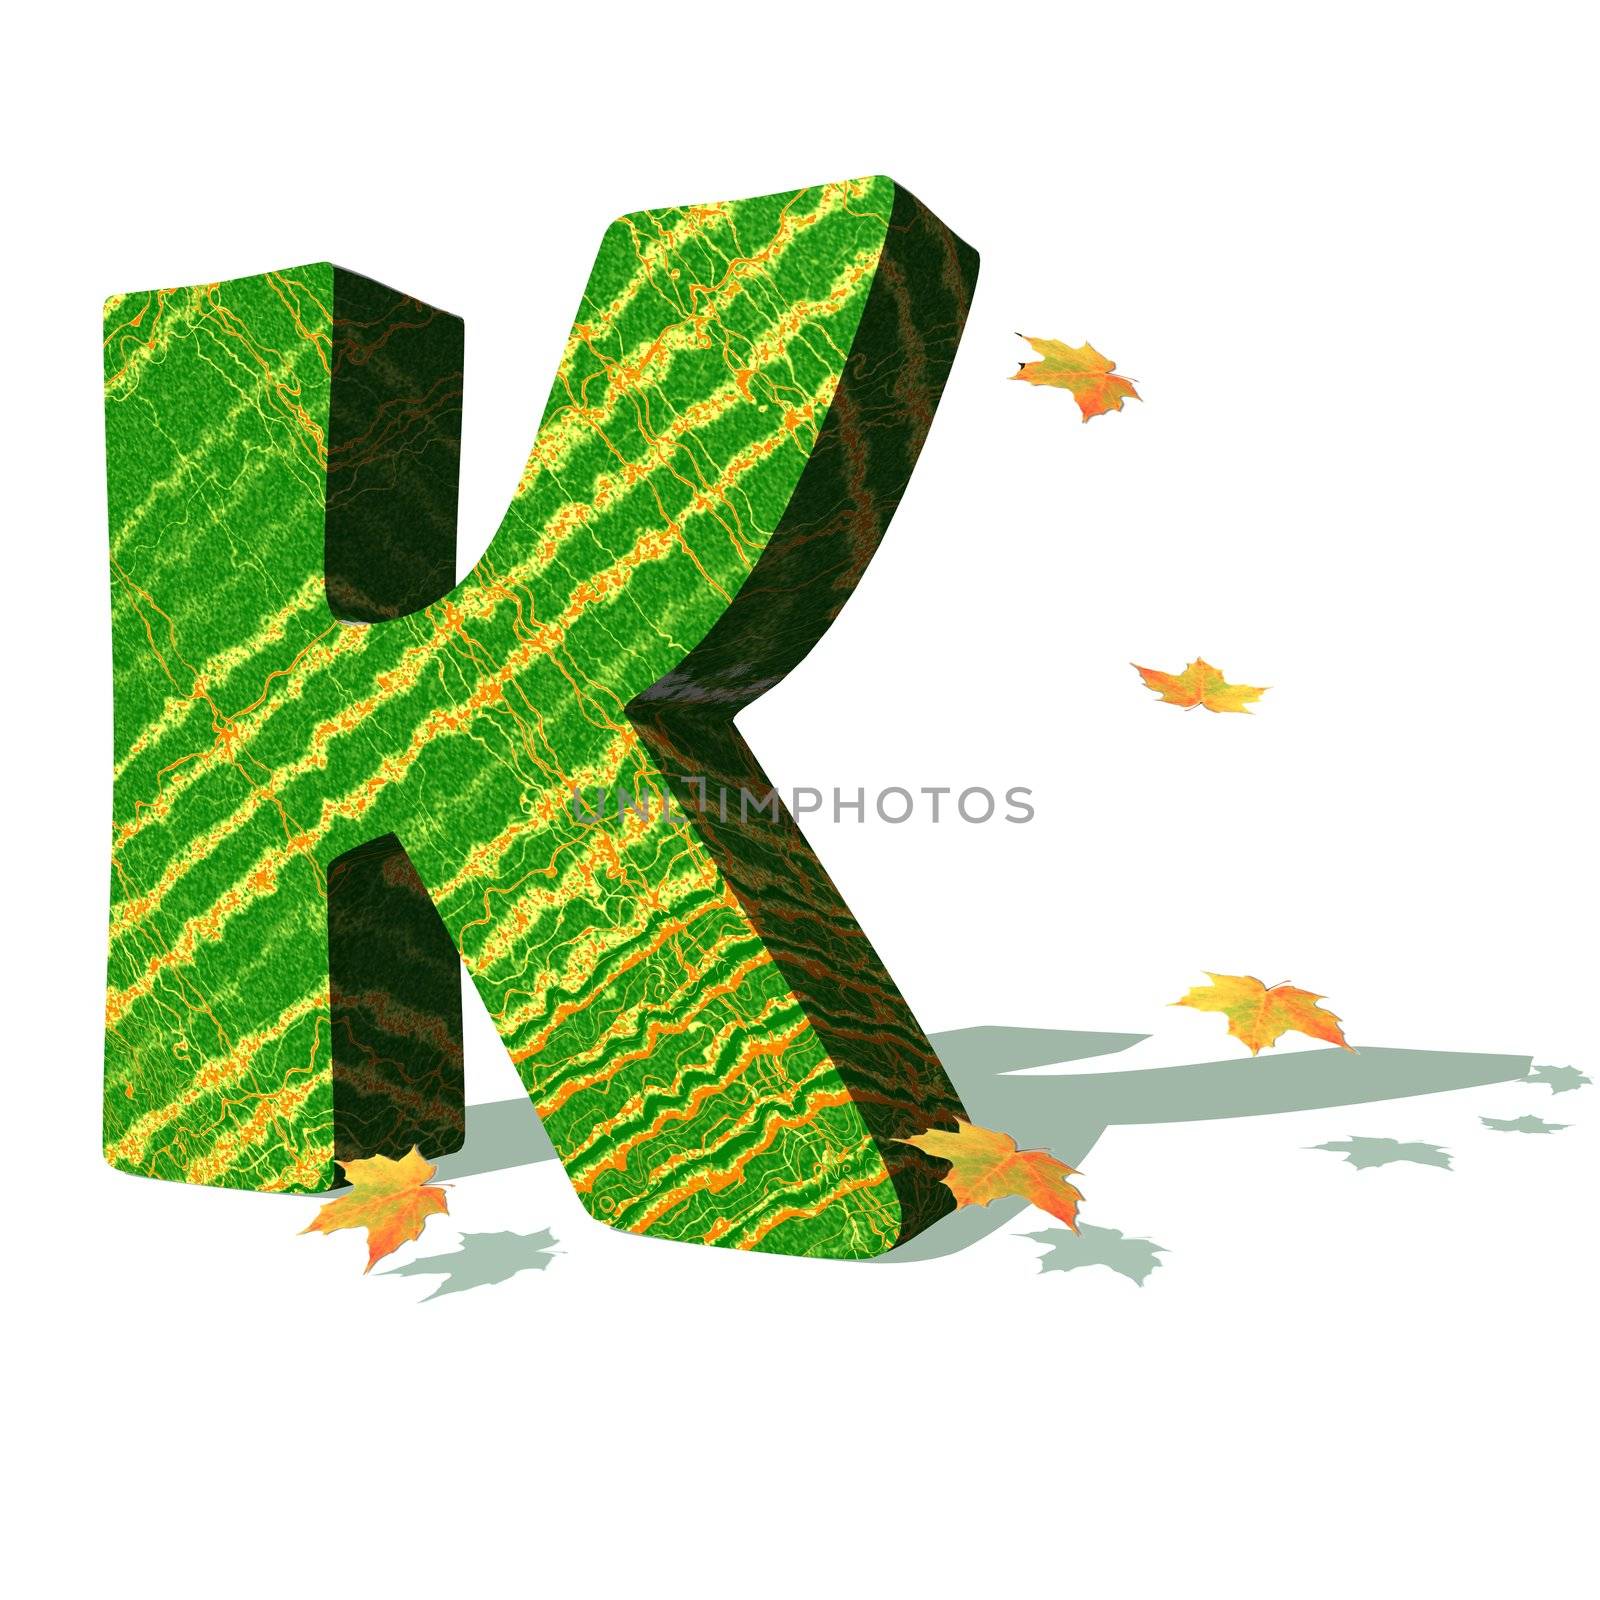 Ecological K letter by Elenaphotos21